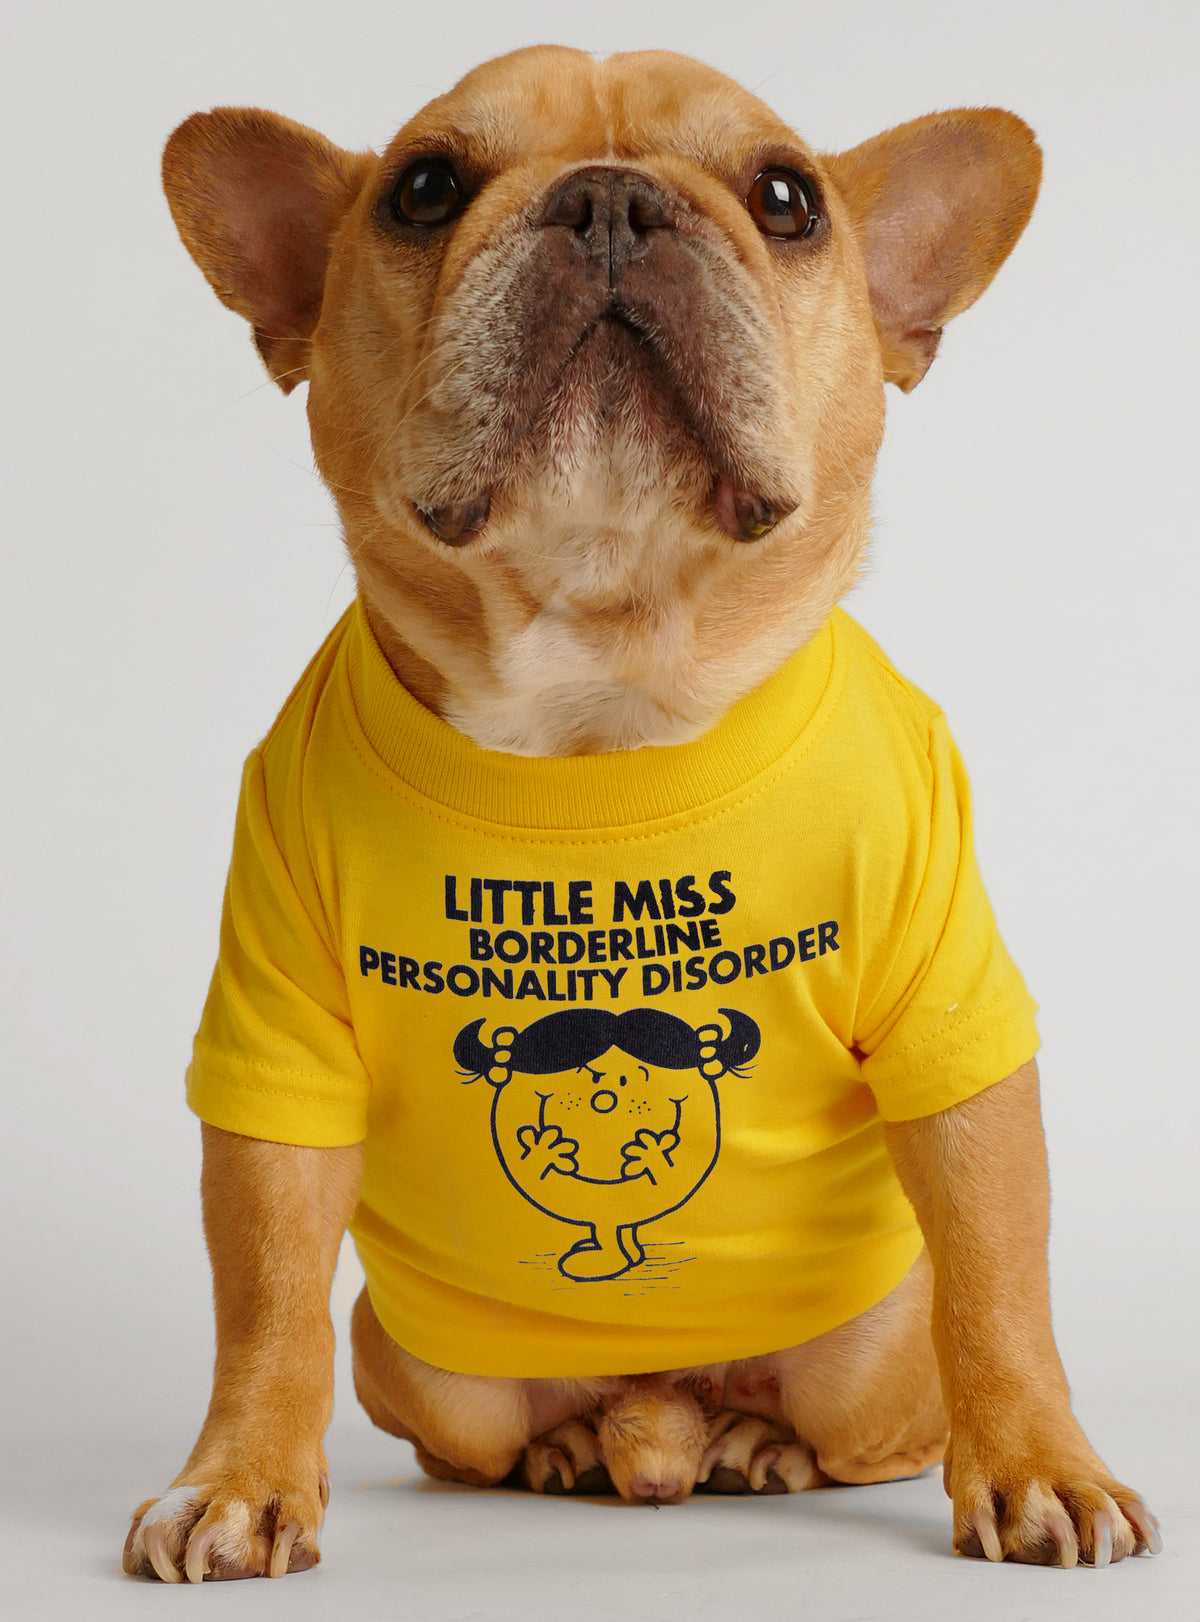 Little Miss Borderline Personality Disorder Dog Tee